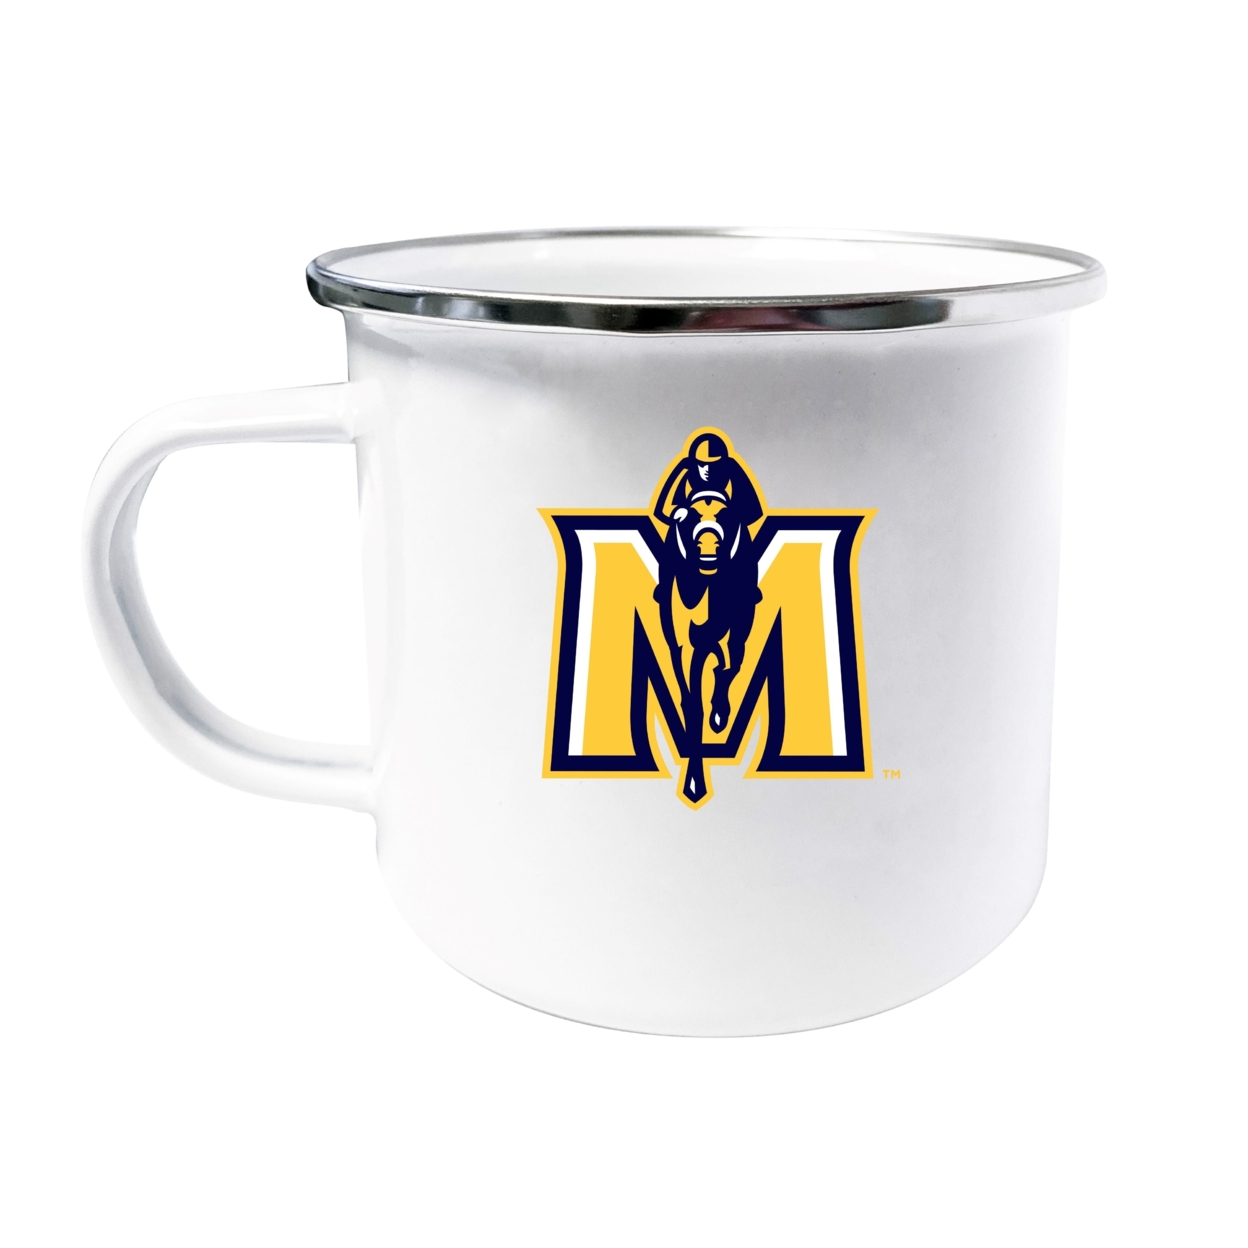 Murray State University Tin Camper Coffee Mug - Choose Your Color - Navy